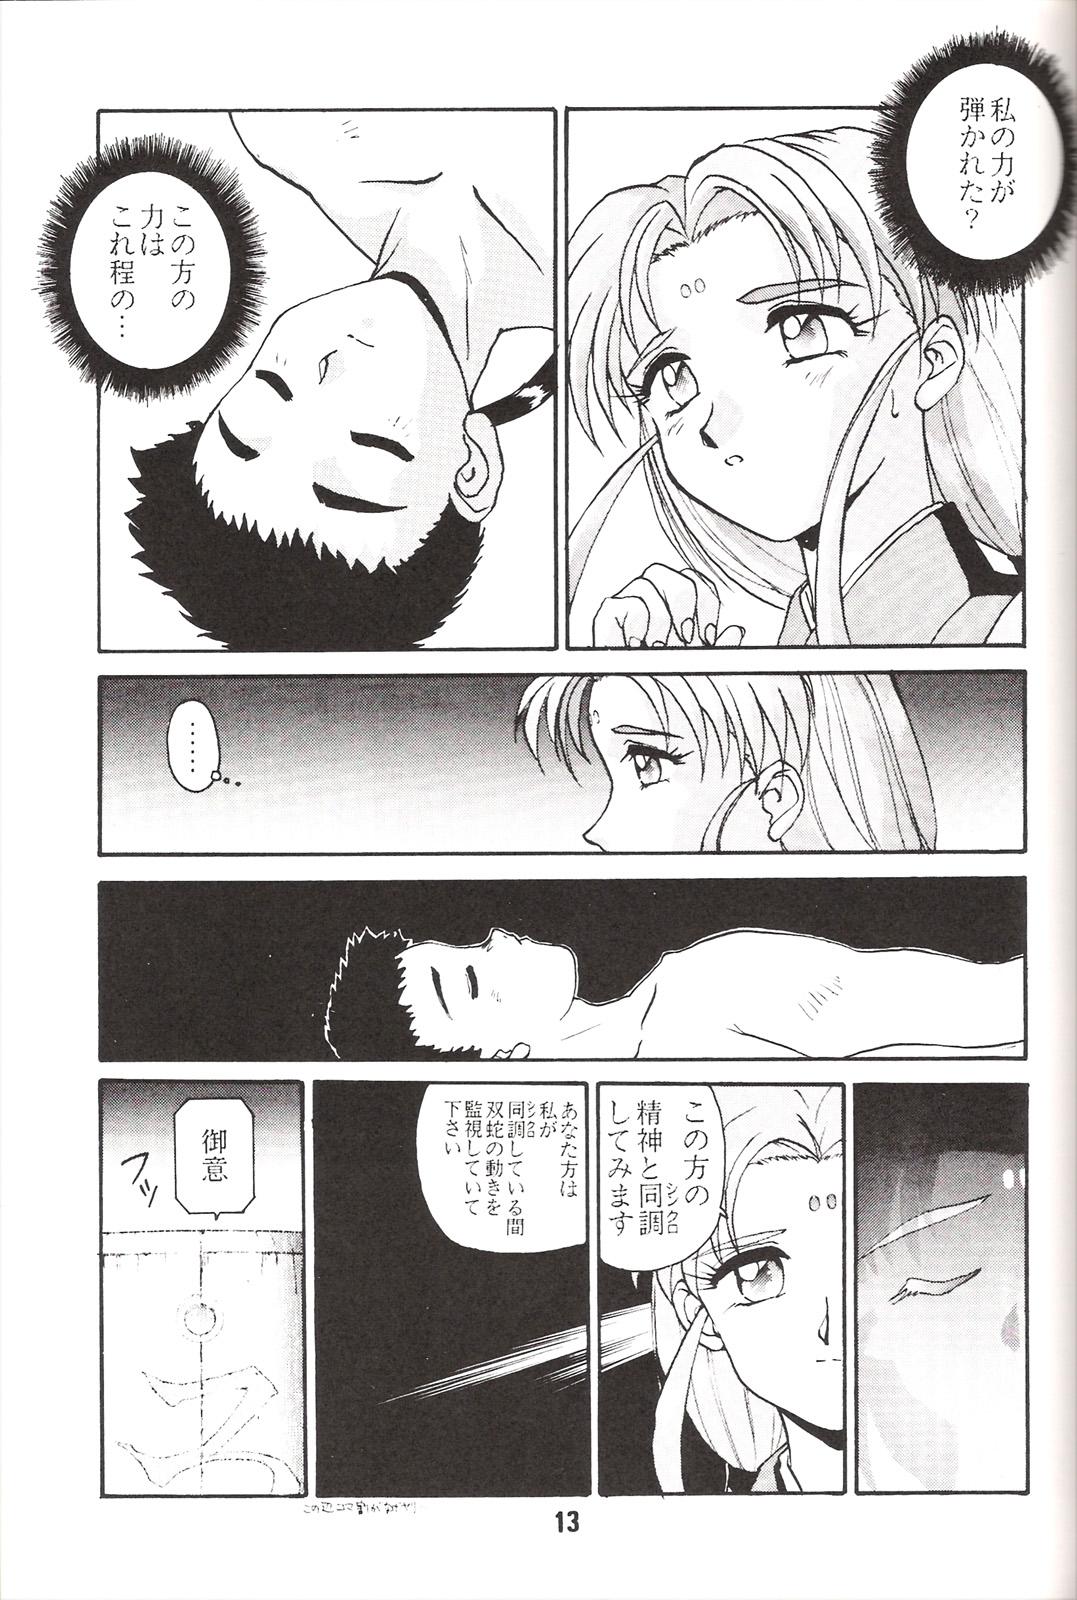 Petite Teen Do Not Turn Over! - Tenchi muyo Amateurs Gone - Page 12